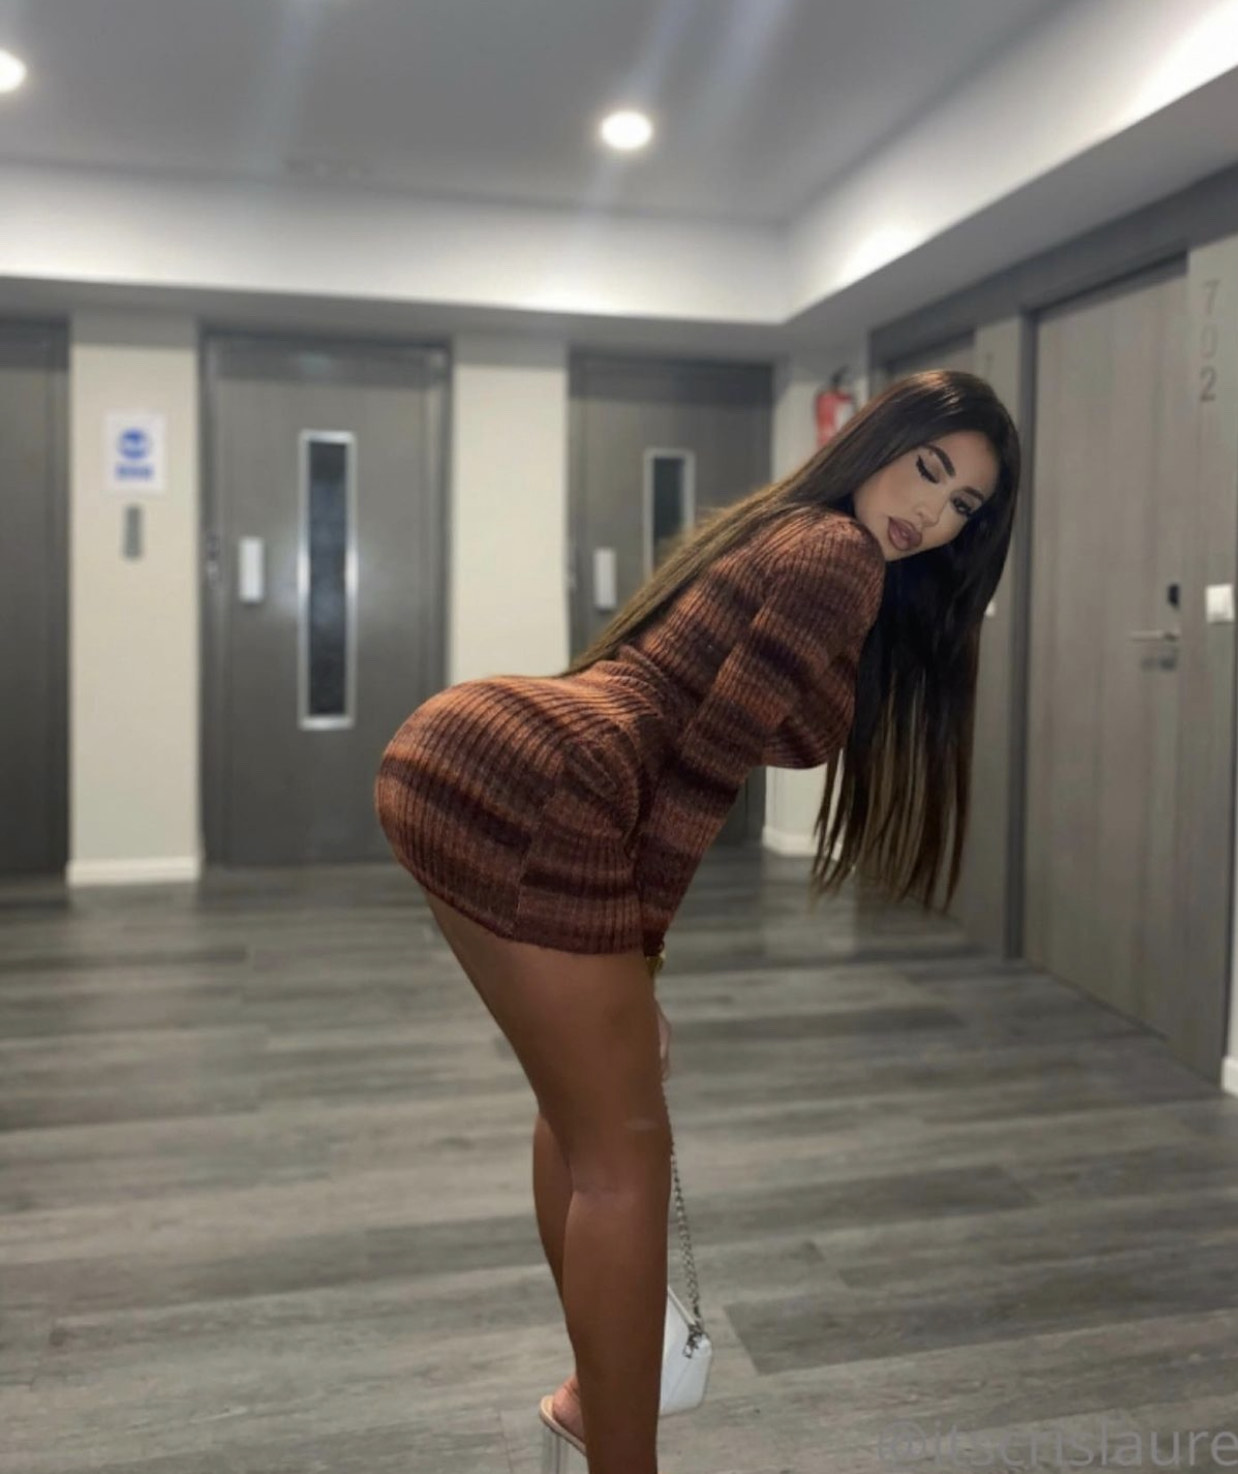 Lauren showing you her round ass in a sweater 